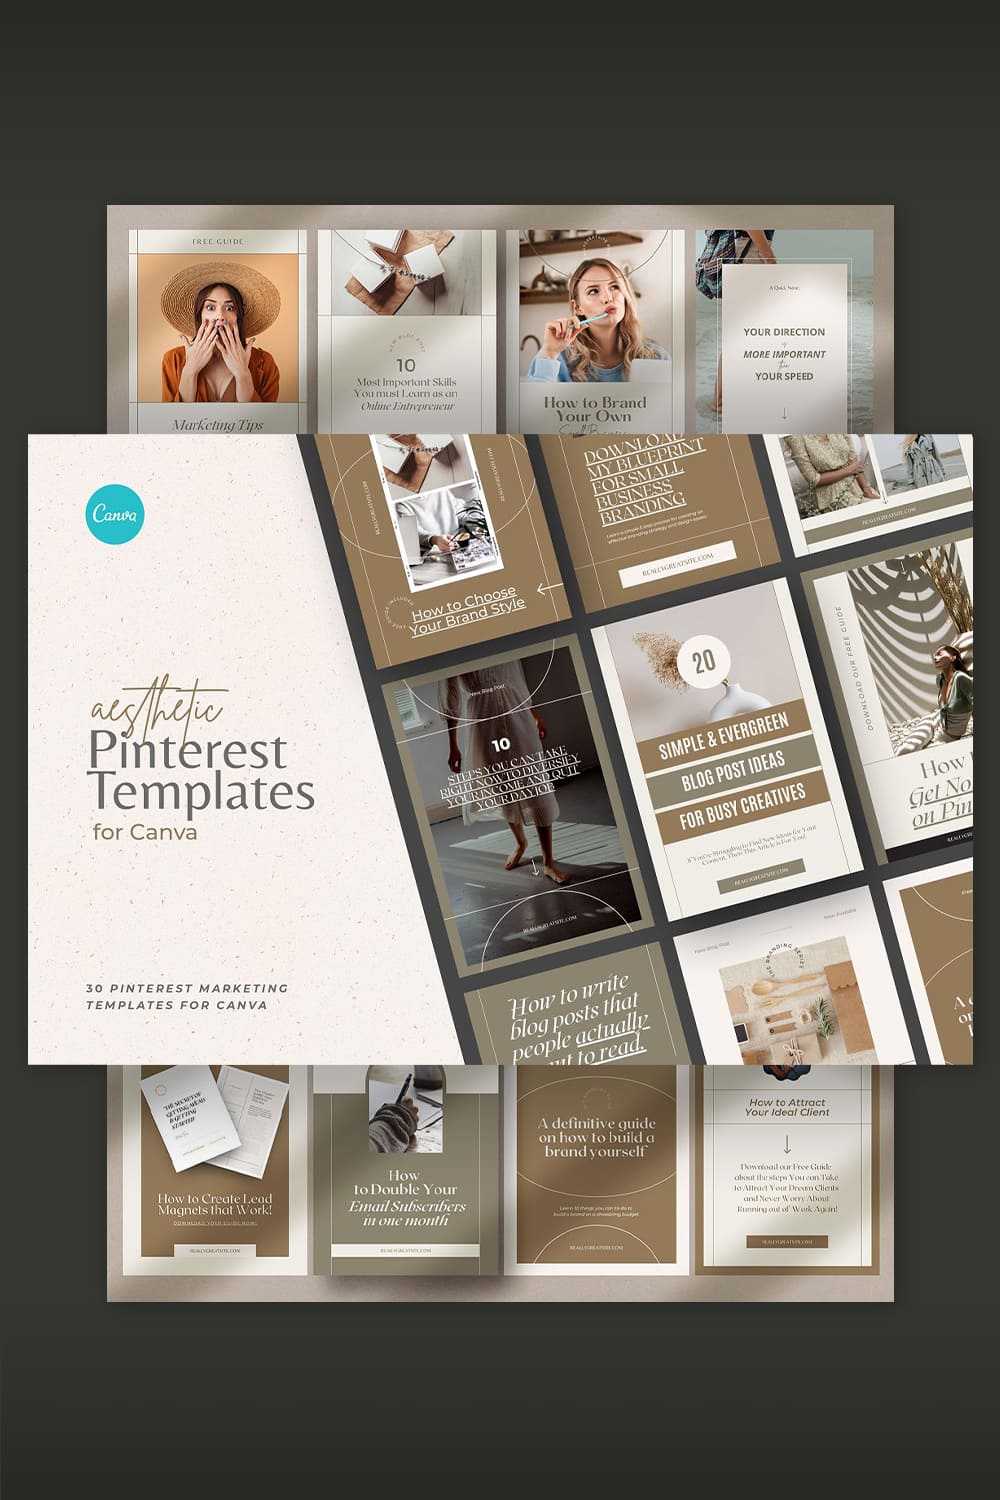 Aesthetic Pinterest Templates For Canva - "Your Direction More Important Then Your Speed".